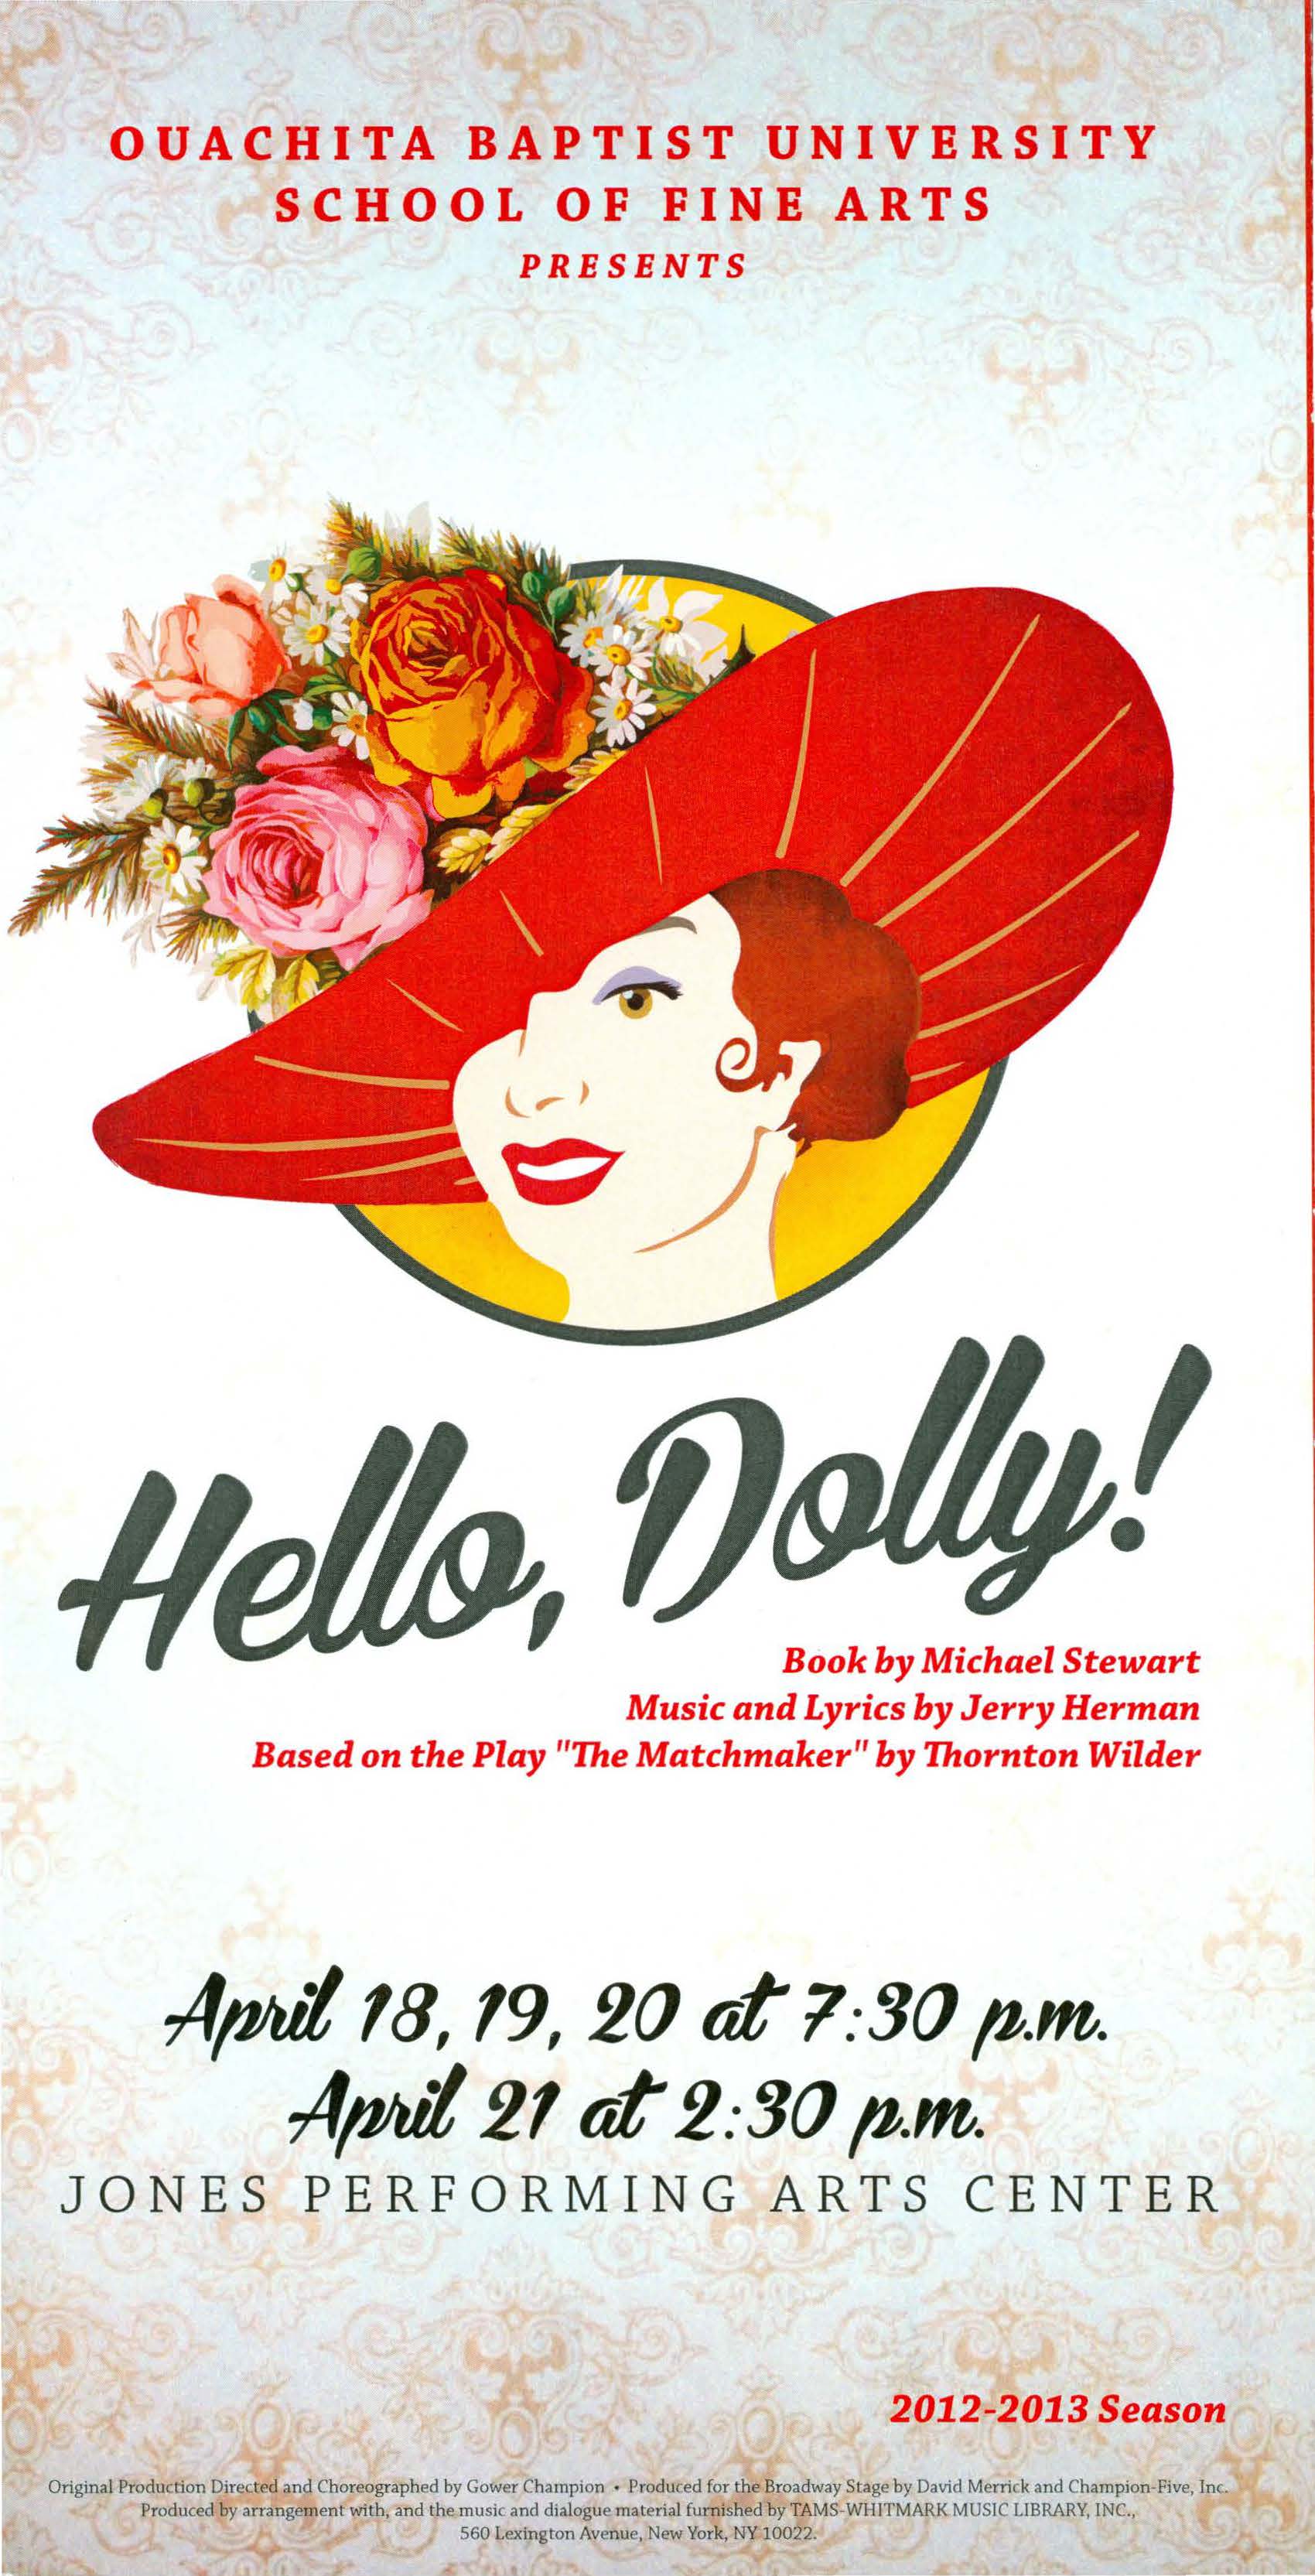 Hello, Dolly!: An OBU Musical Theatre Production